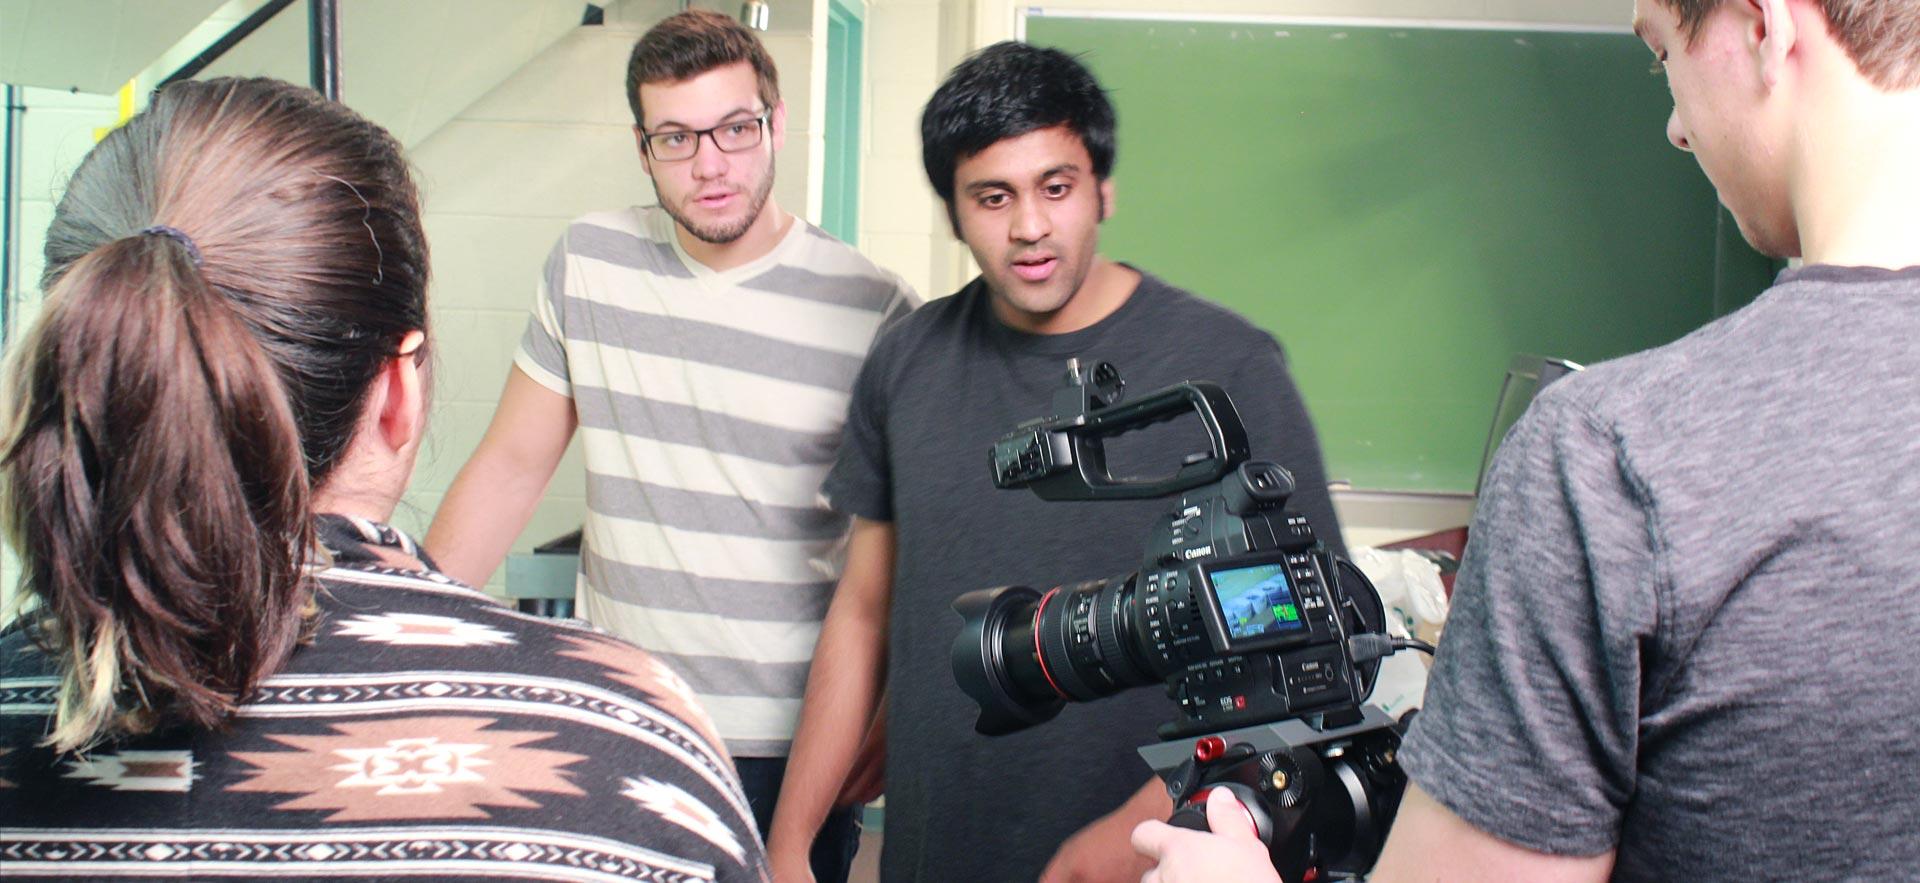 Digital video students prepare to shoot a video on the о campus.